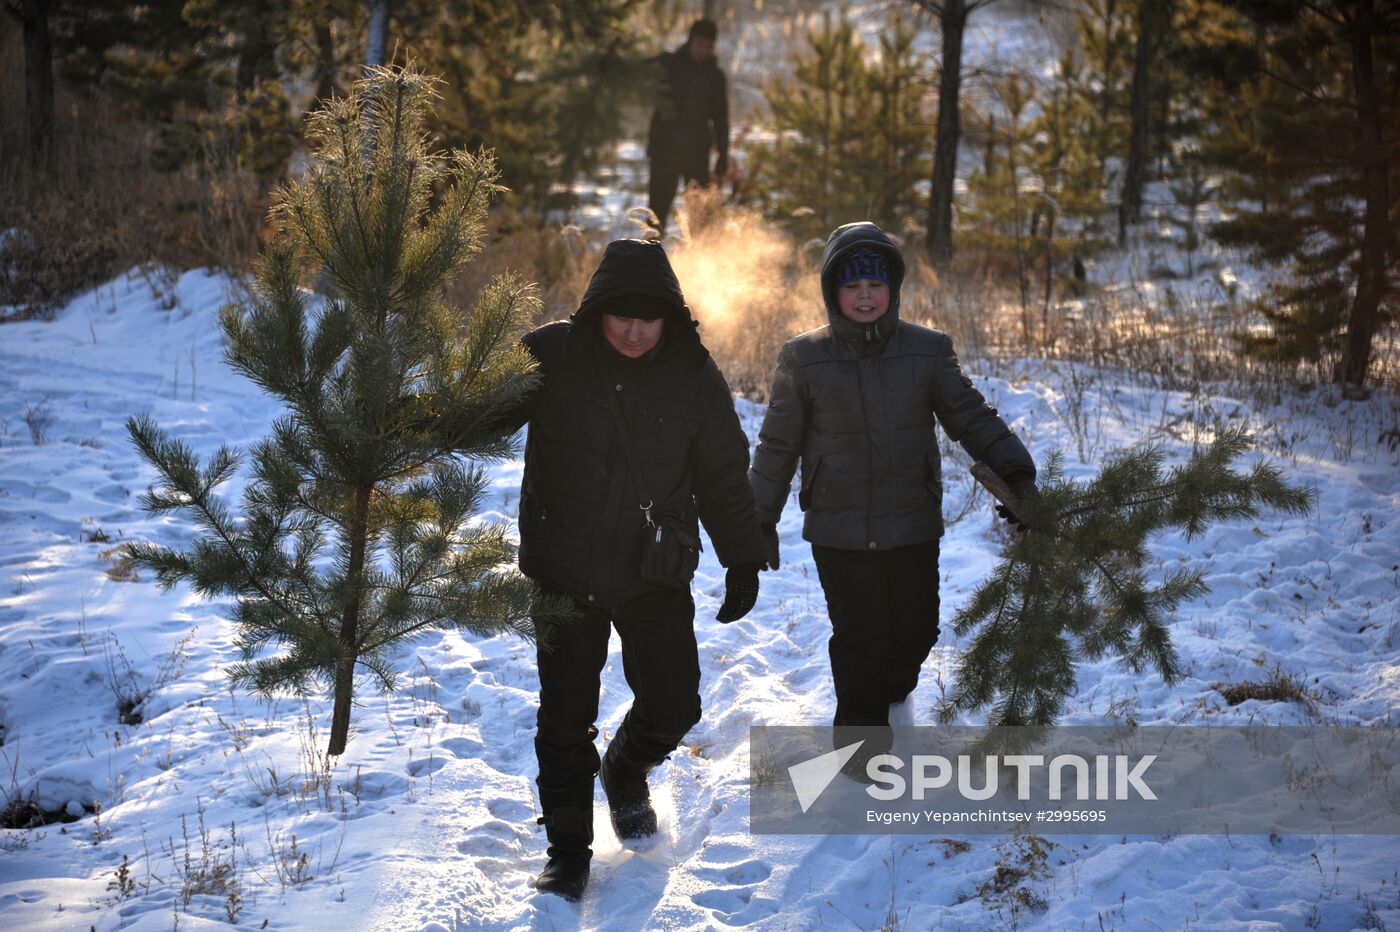 Christmas trees harvested in Trans-Baikal Territory